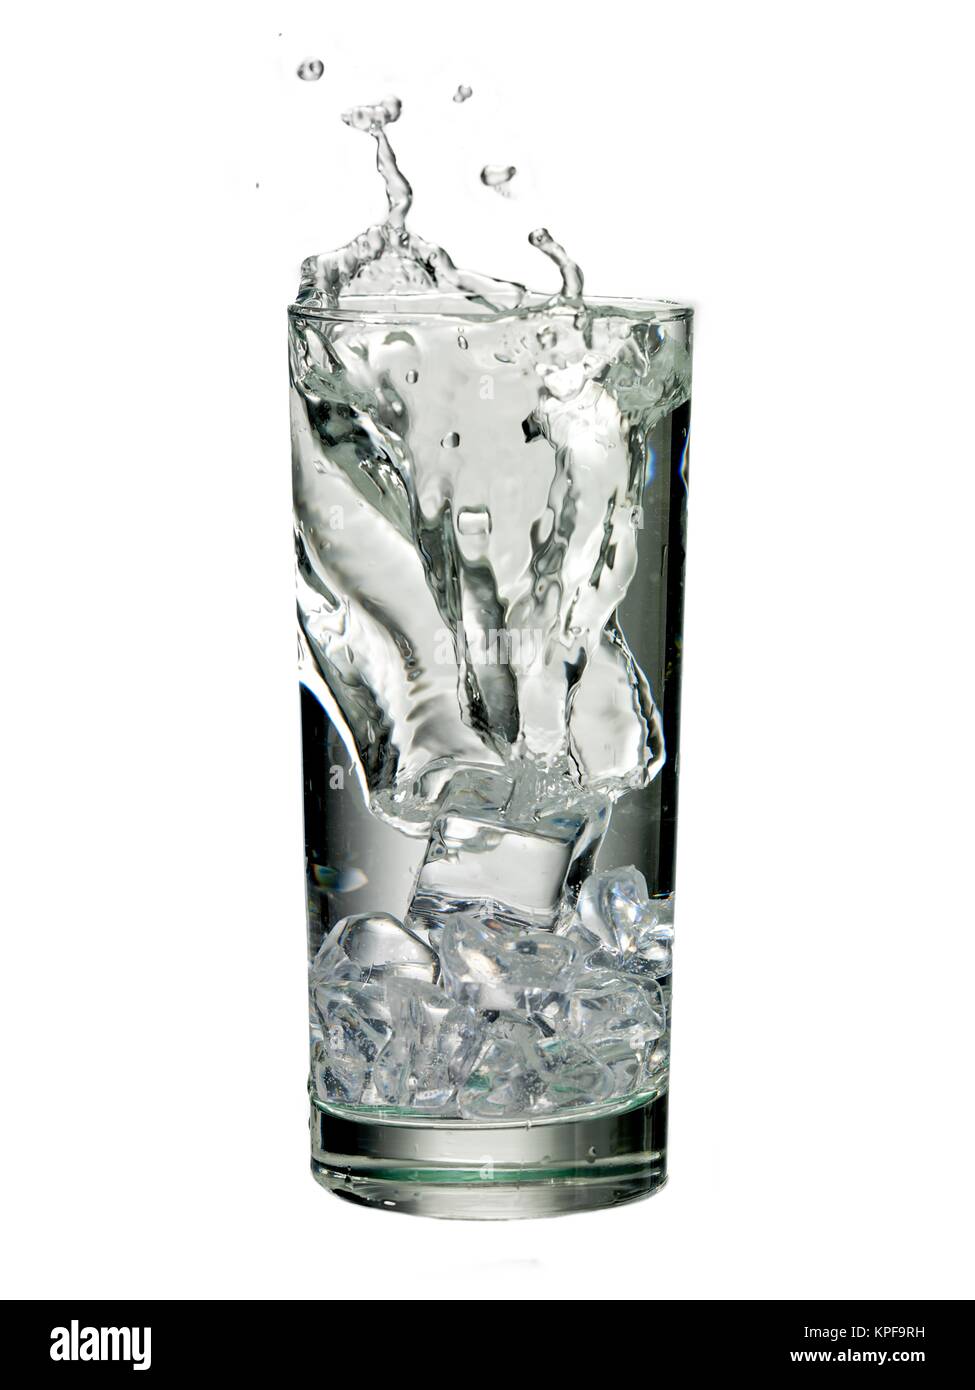 glass of water with splash Stock Photo